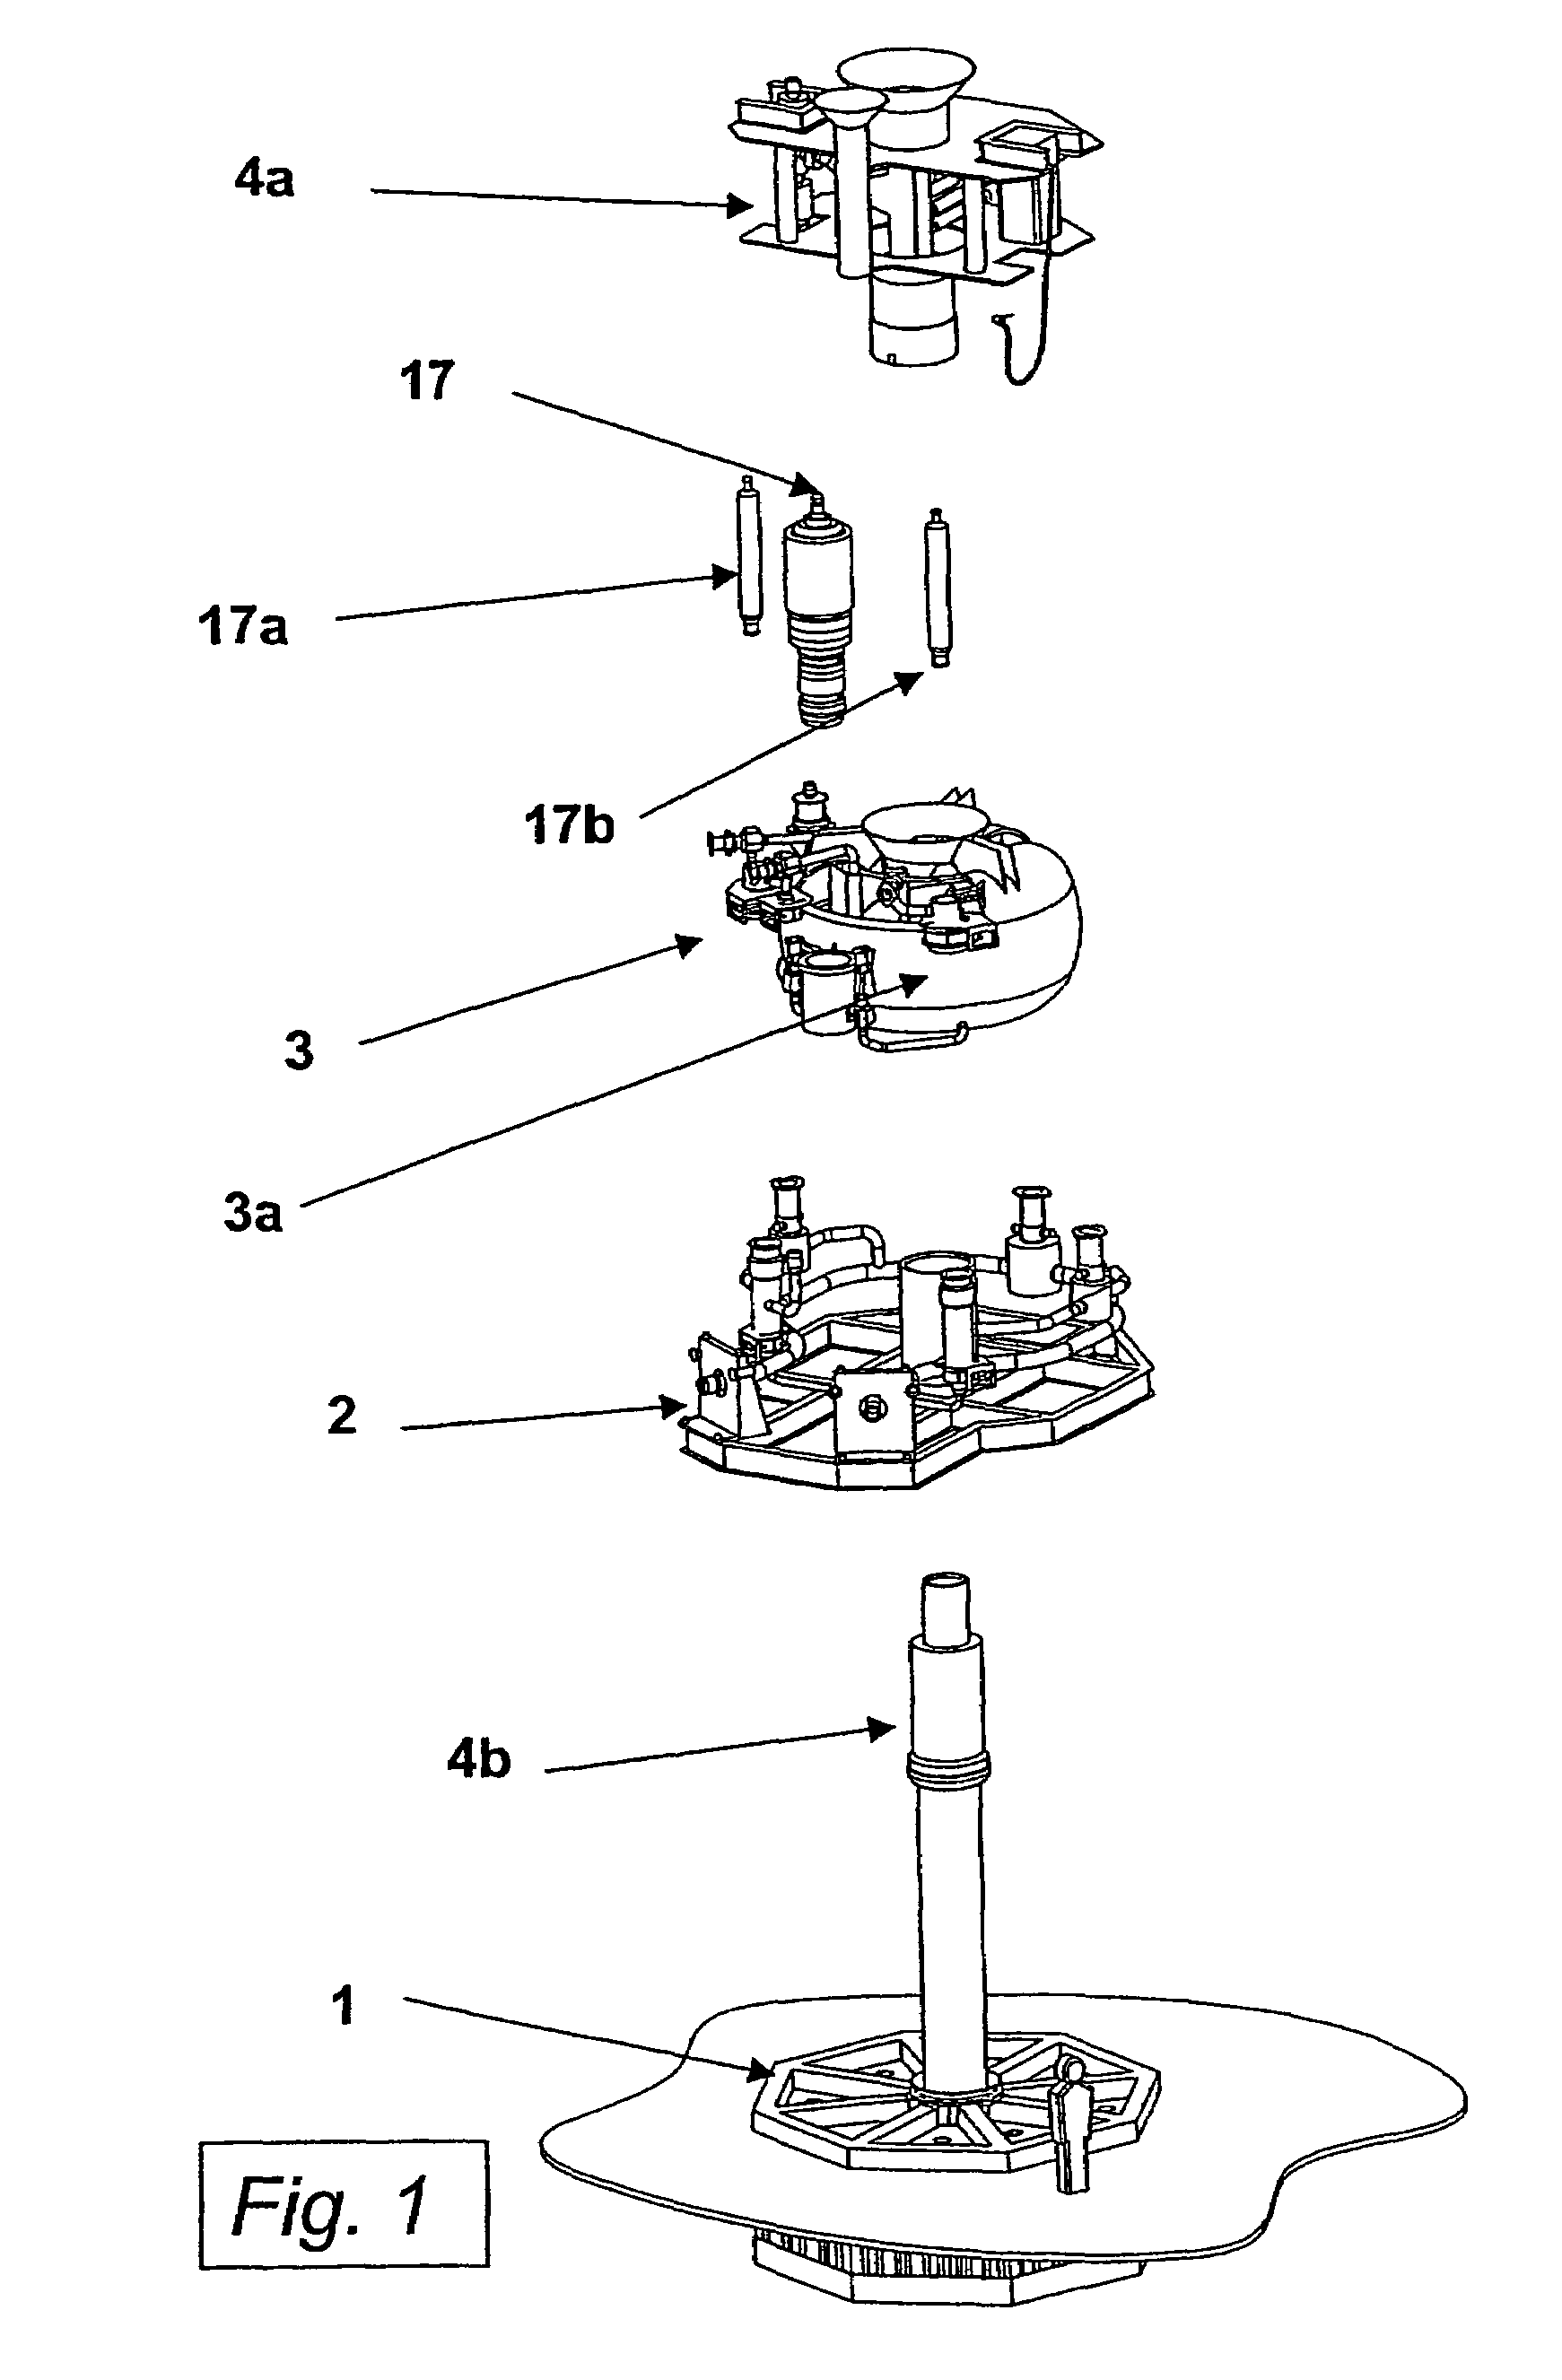 Subsea separation apparatus for treating crude oil comprising a separator module with a separator tank